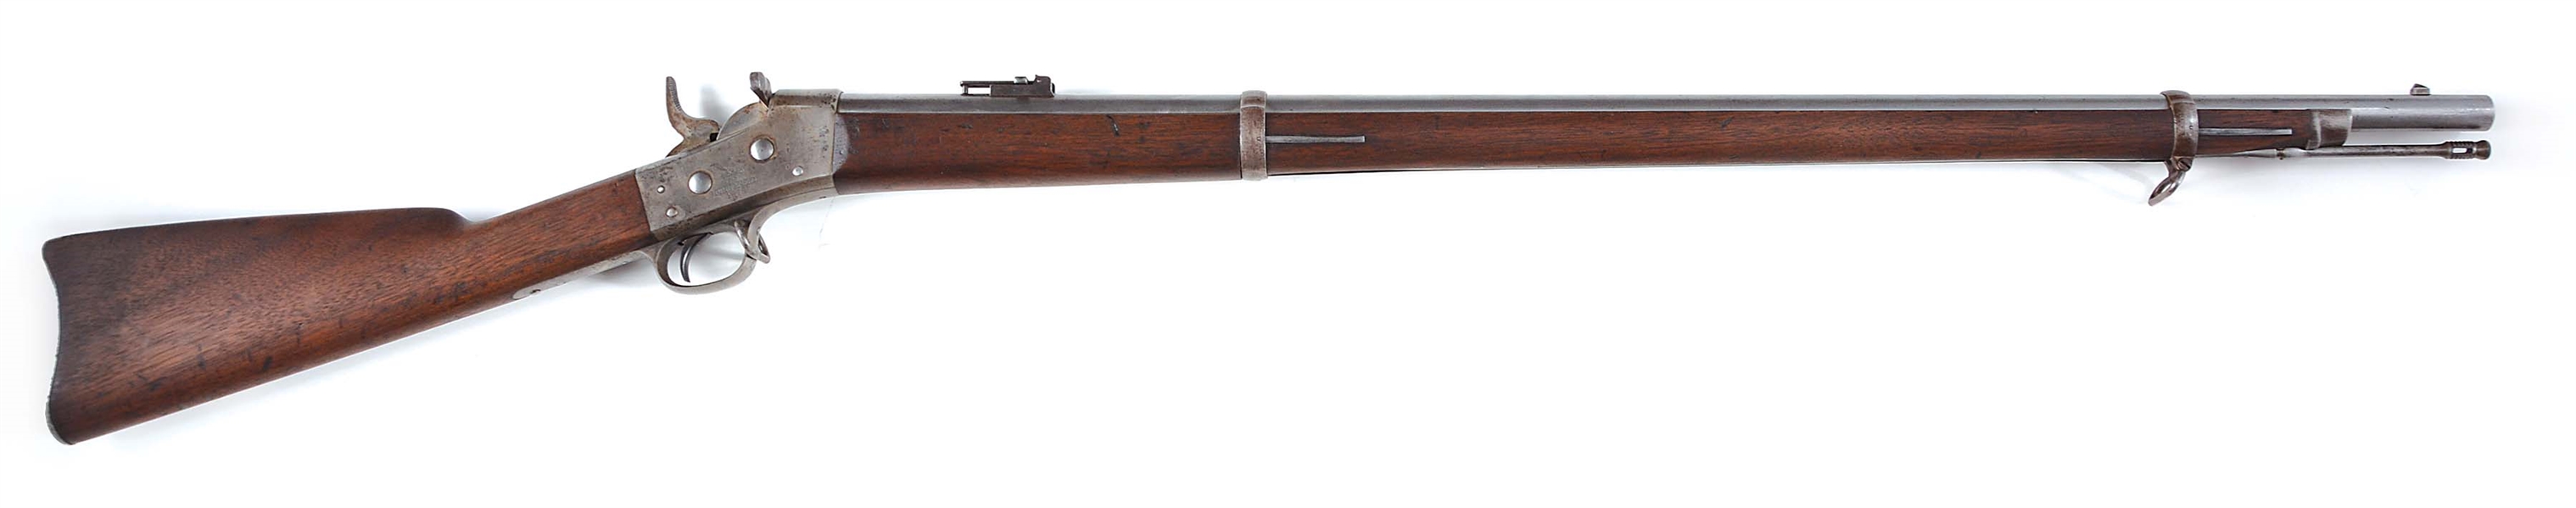 (A) US SPRINGFIELD MODEL 1871 ROLLING BLOCK MILITARY RIFLE.